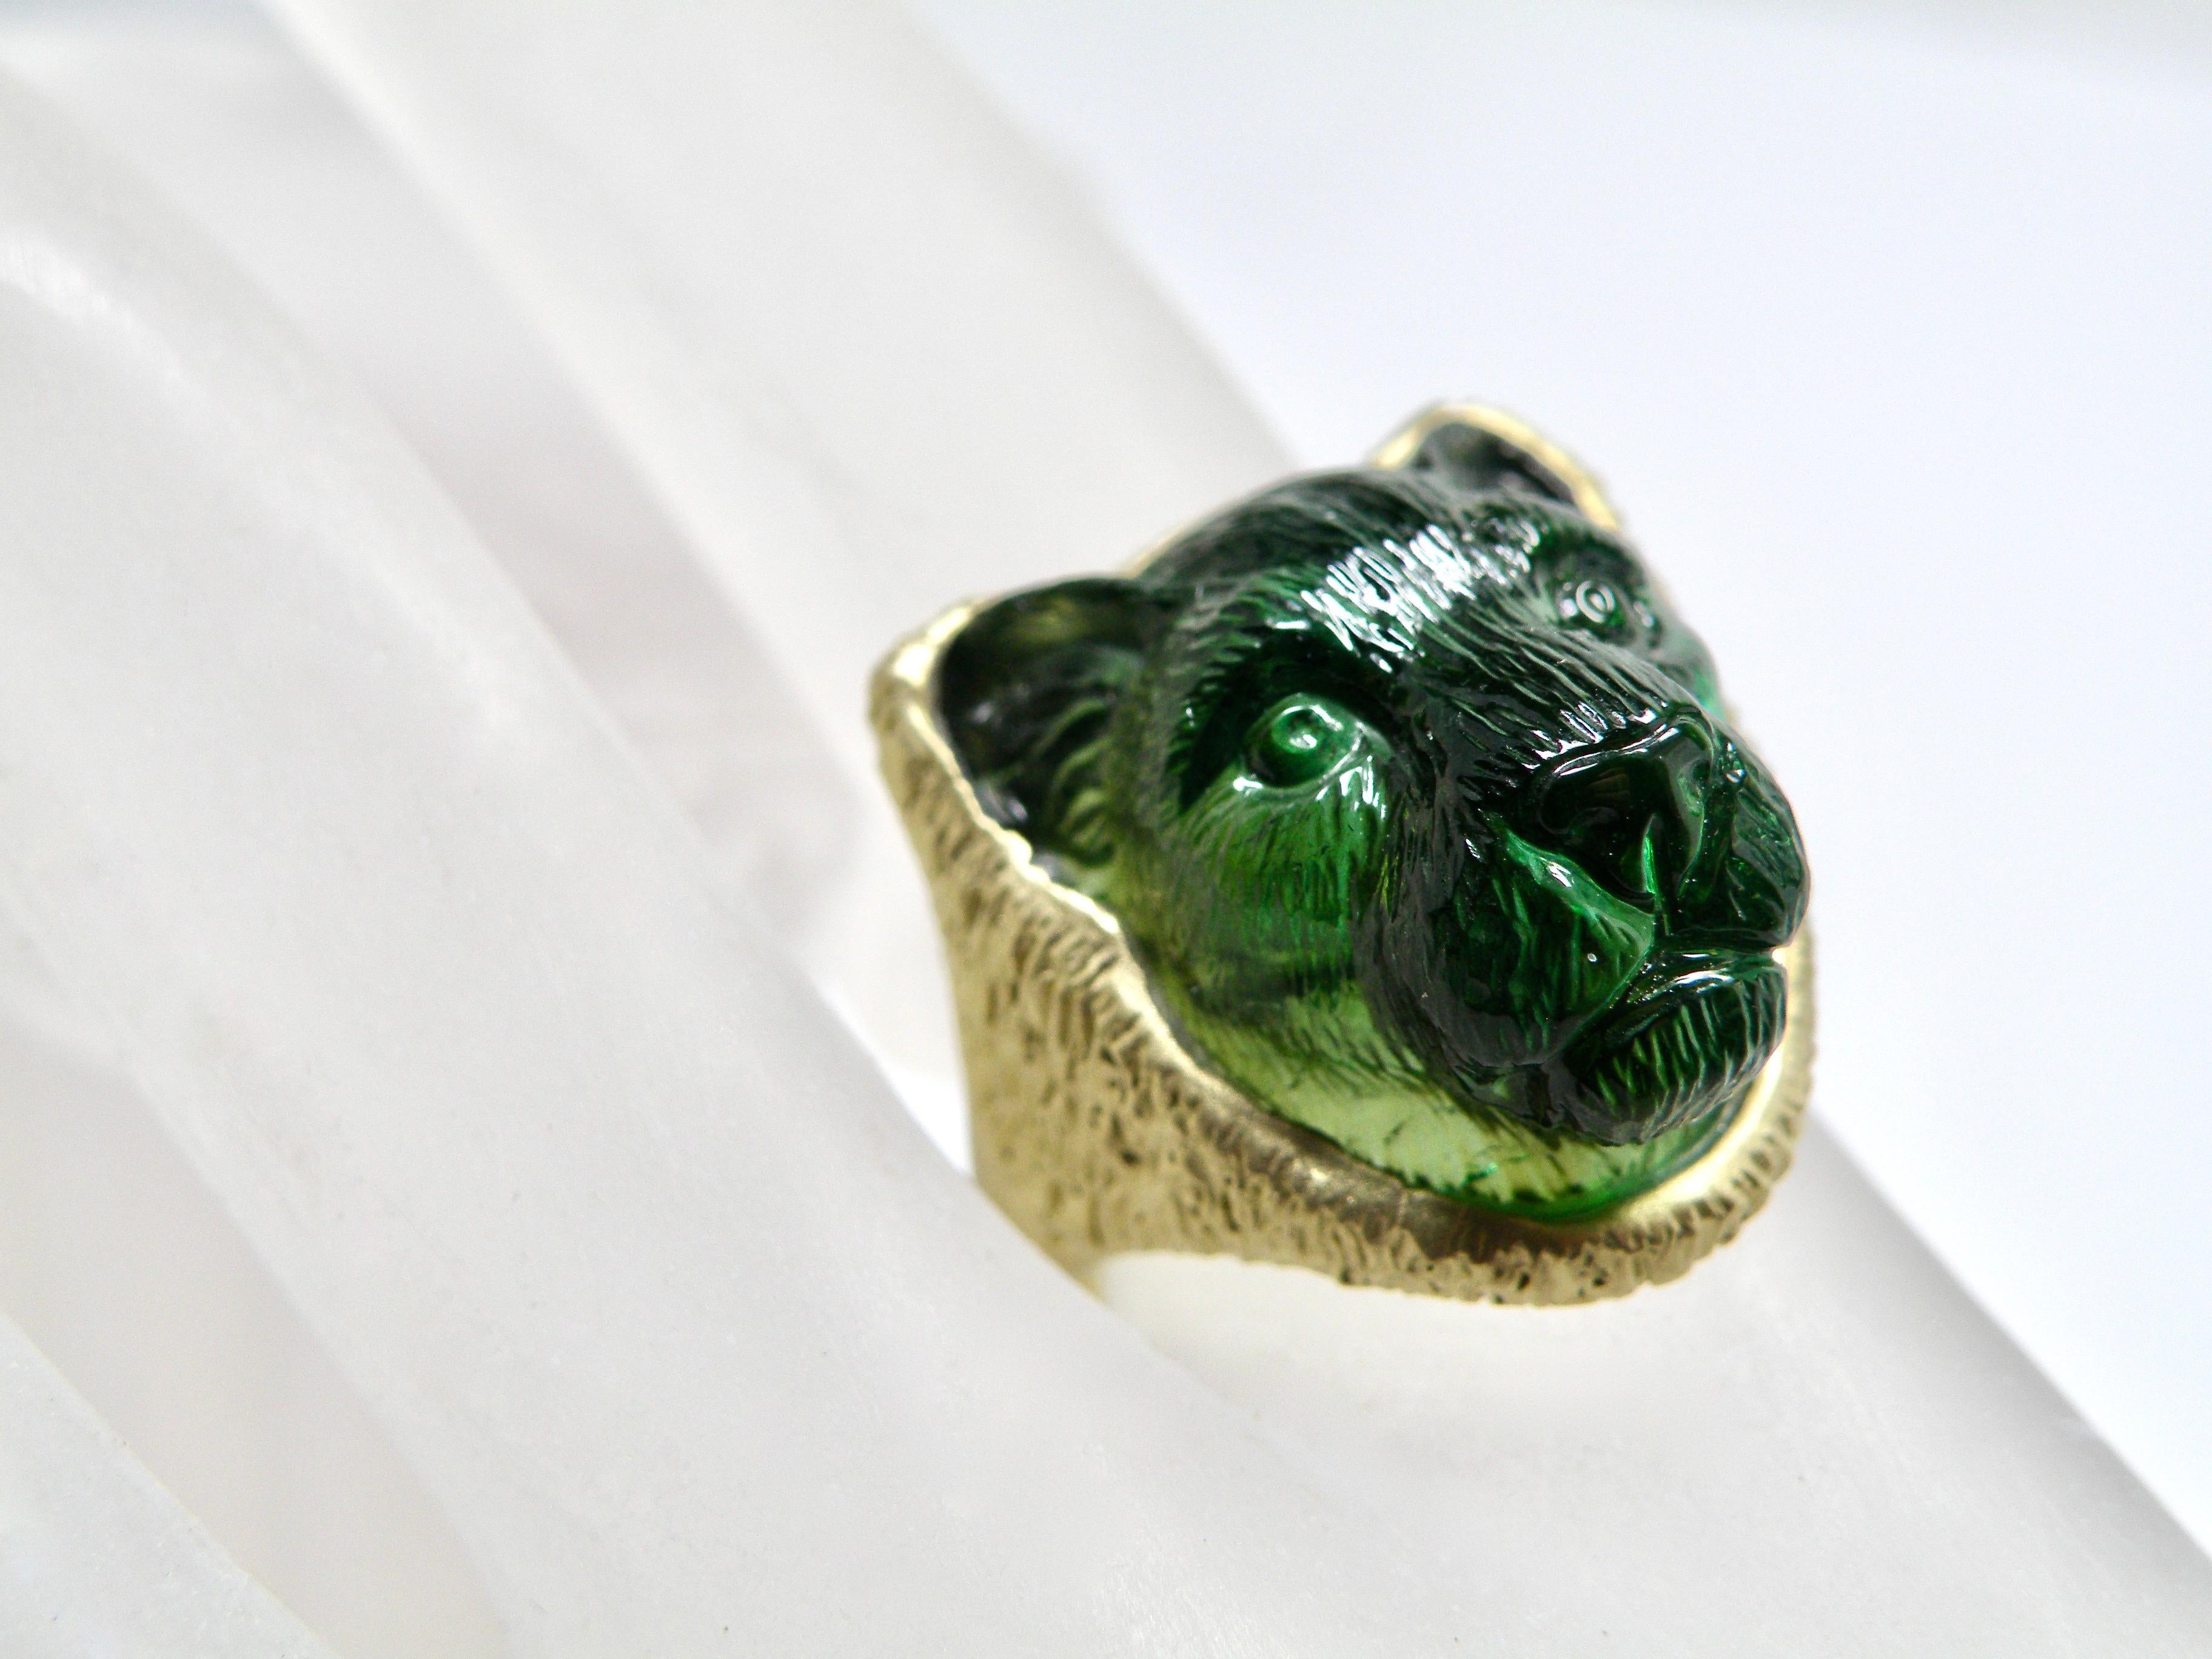 18K gold green tourmaline lionshead unisex ring carved by master Idar Obestein carver.
stone3/4